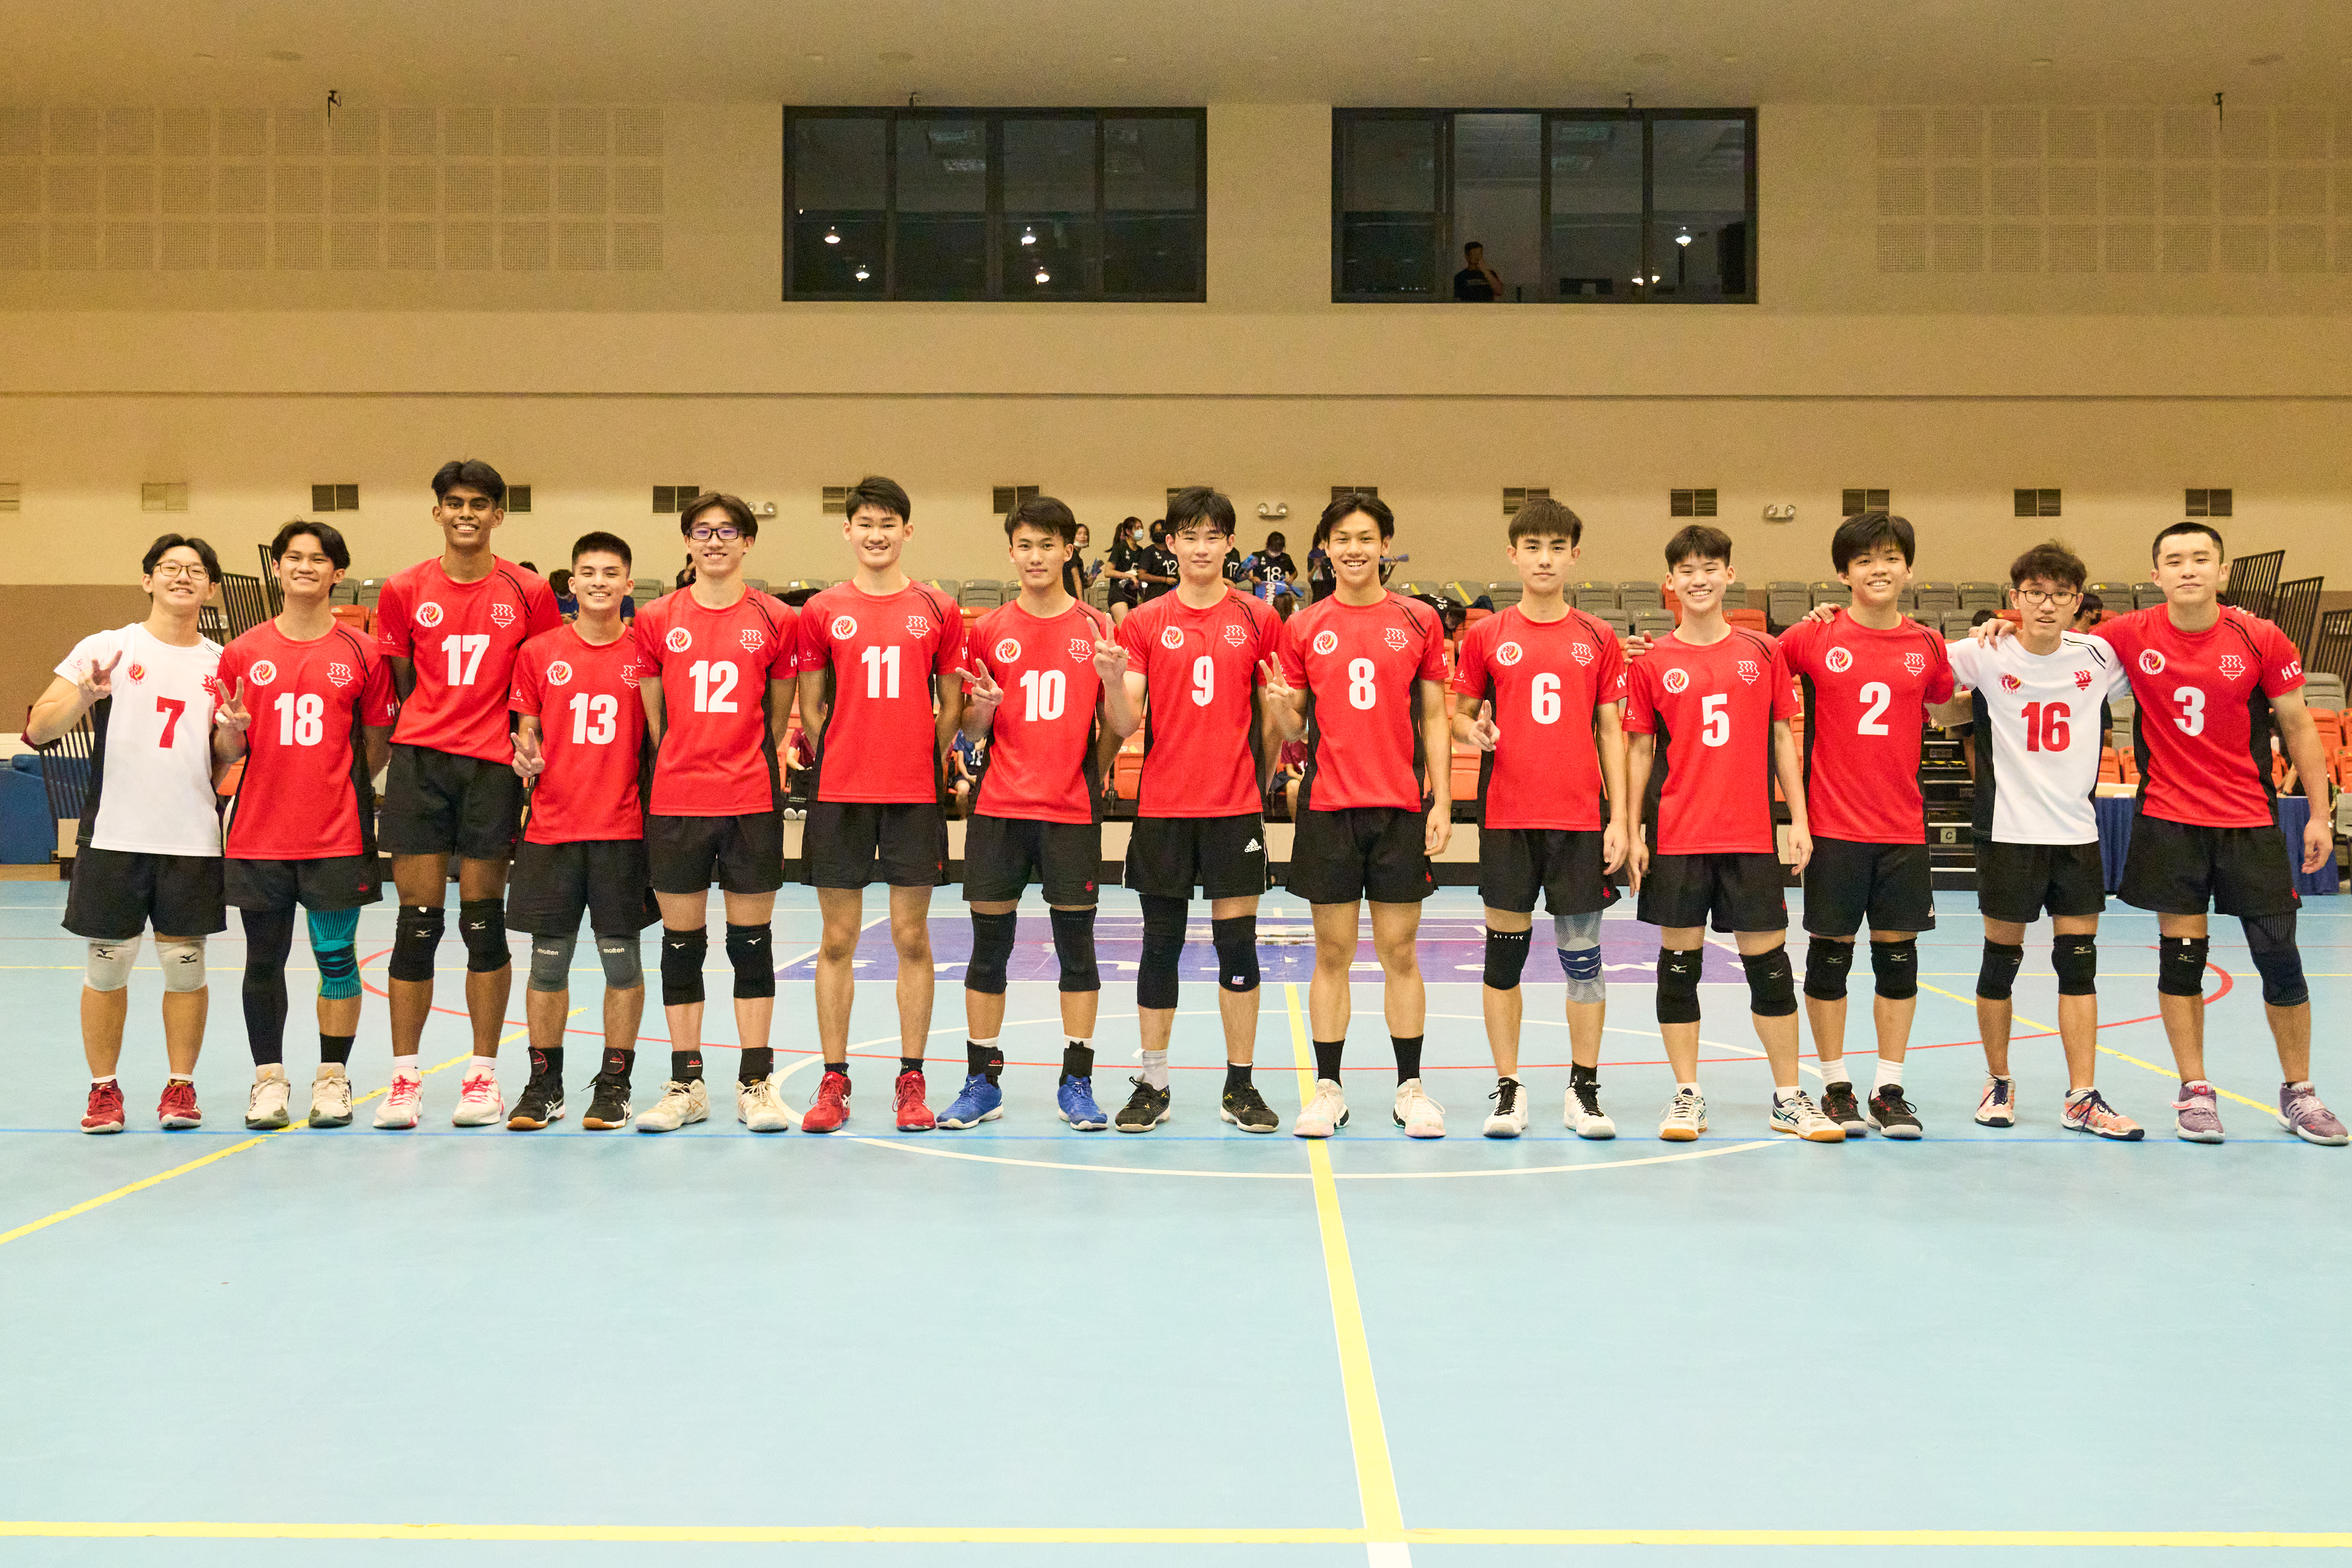 Pictorial - Hwa Chong Institution's volleyballers sweep A Division titles!